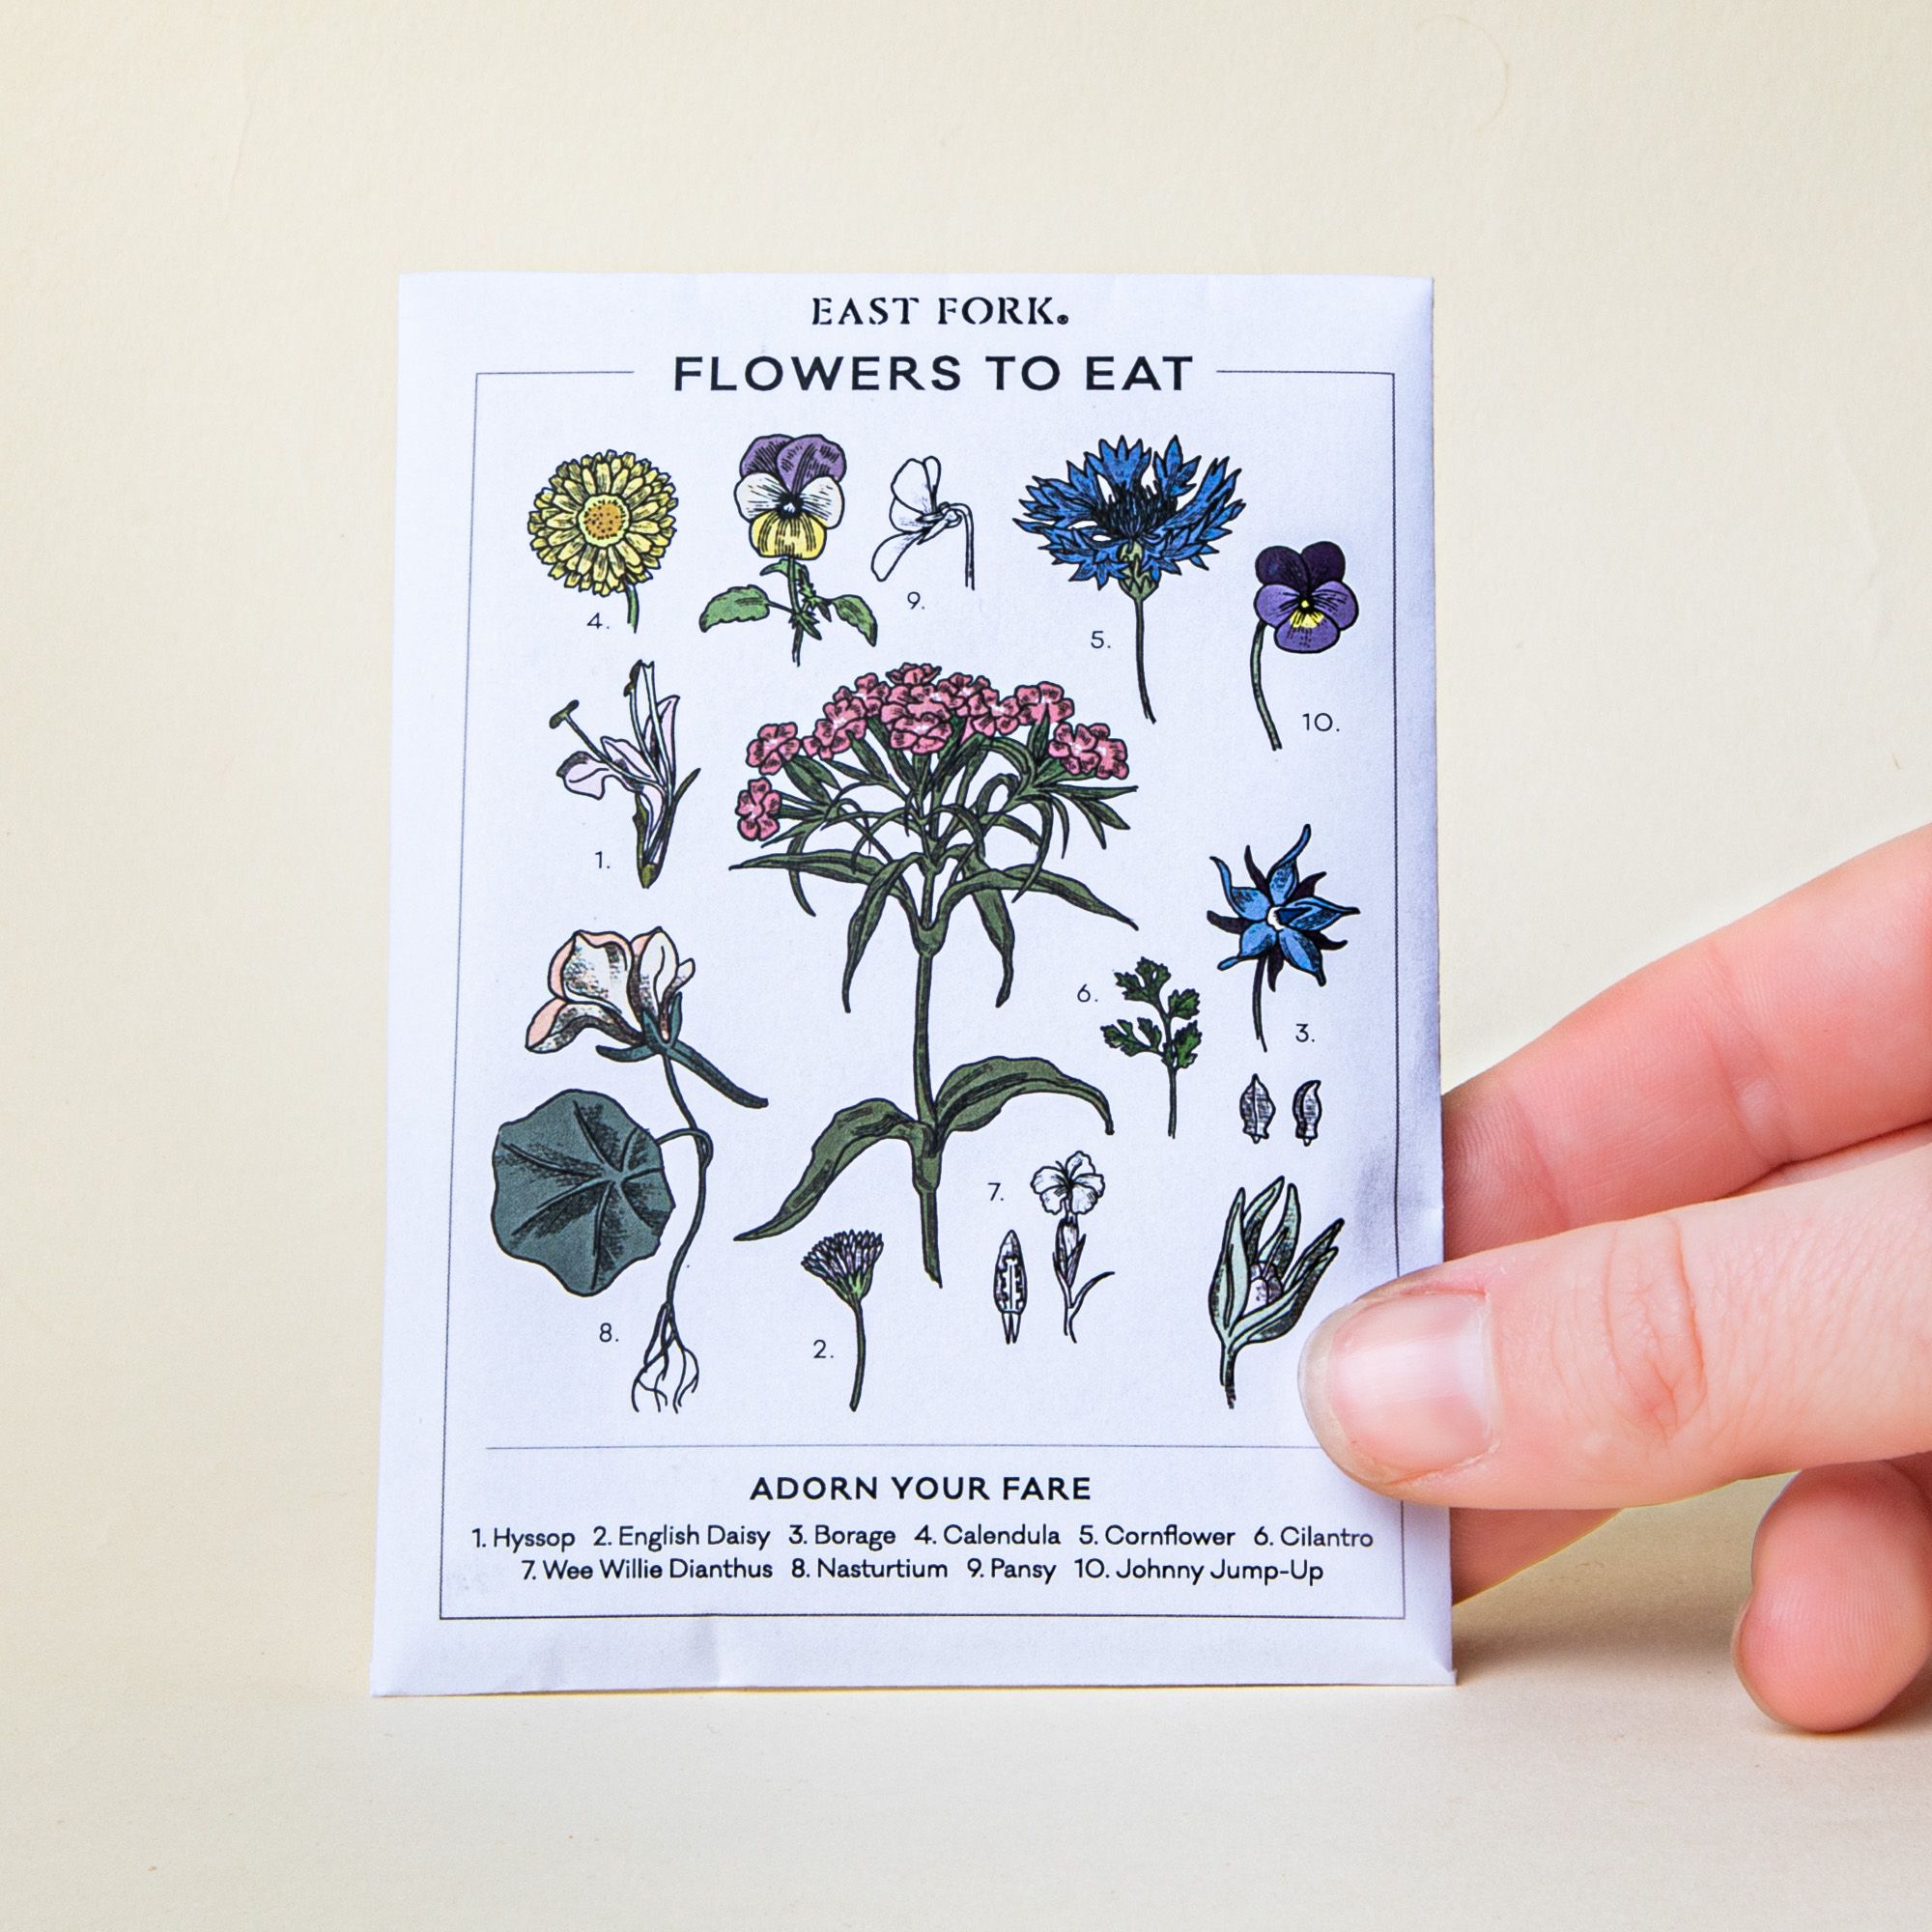 A hand holding a white seed pack that reads "Flowers To Eat" with colorful floral stem illustrations